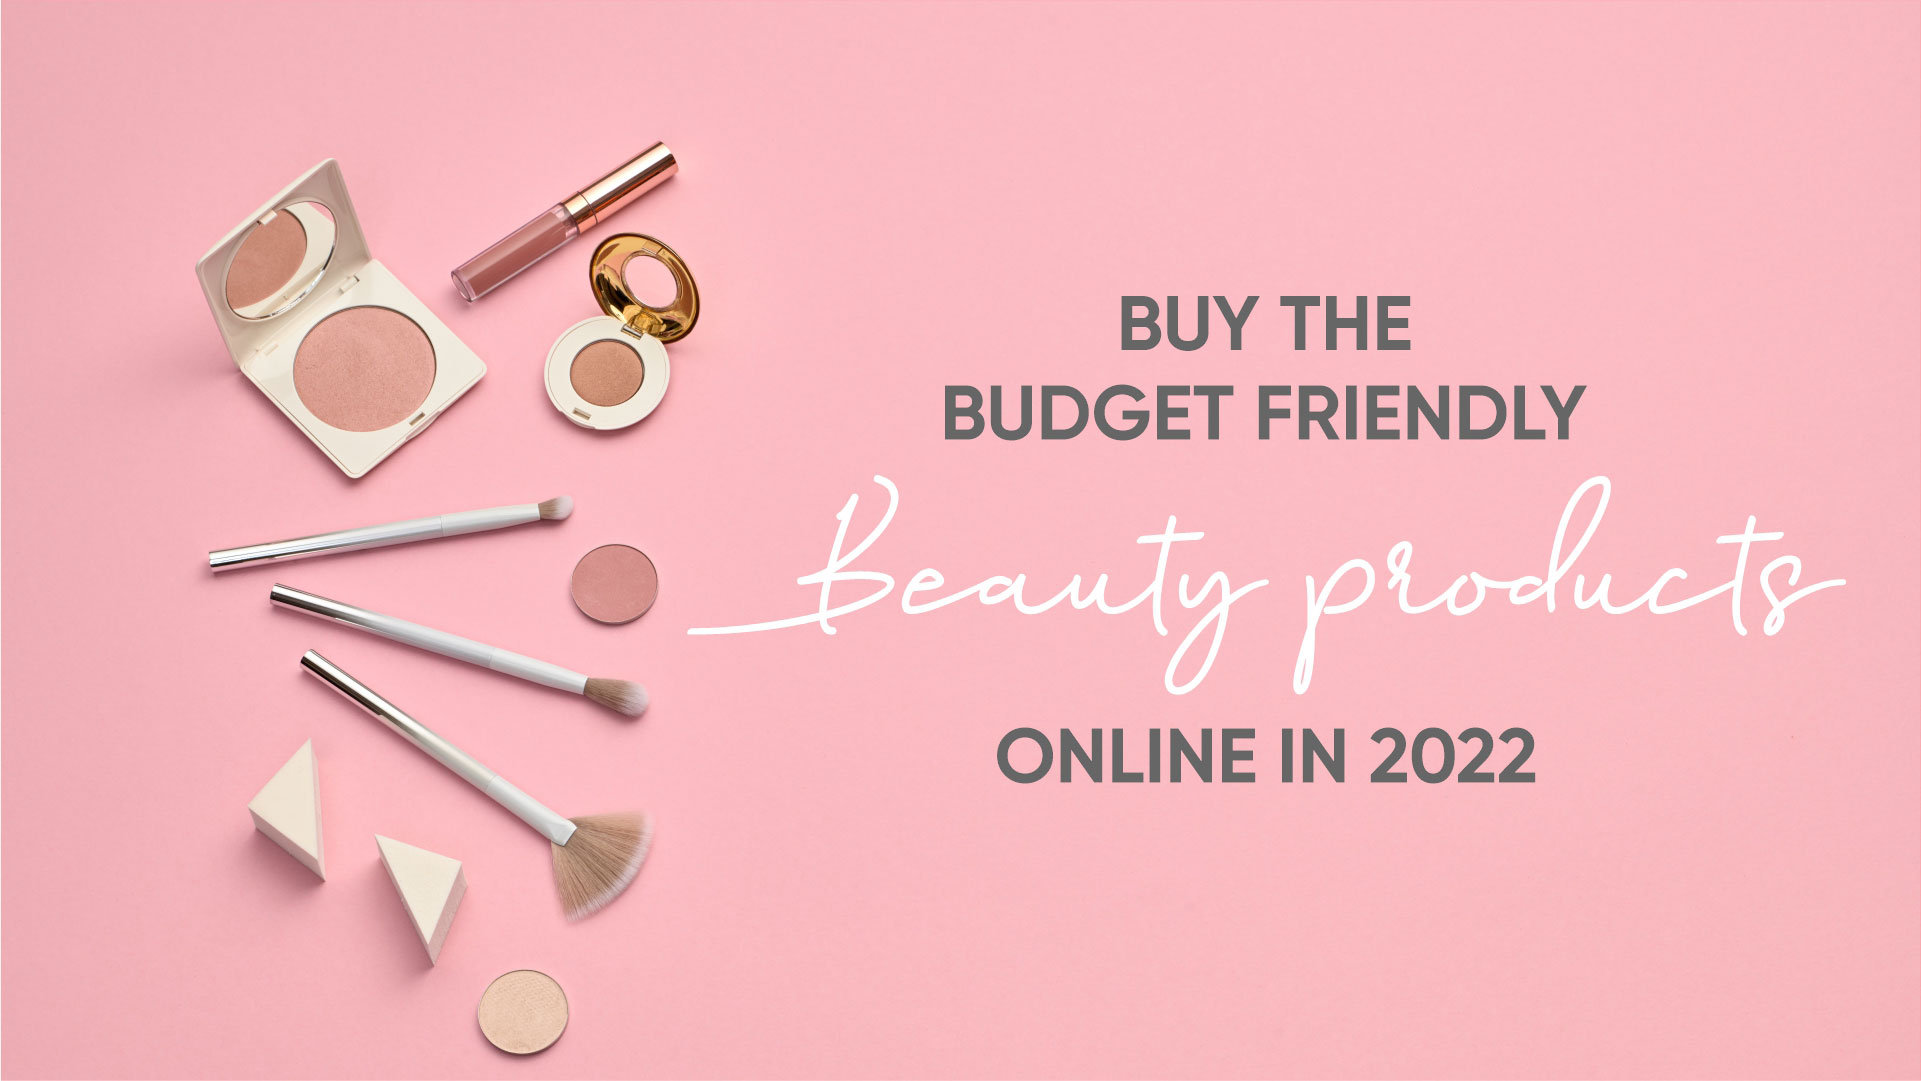  Buy the budget friendly Beauty products online in 2022 